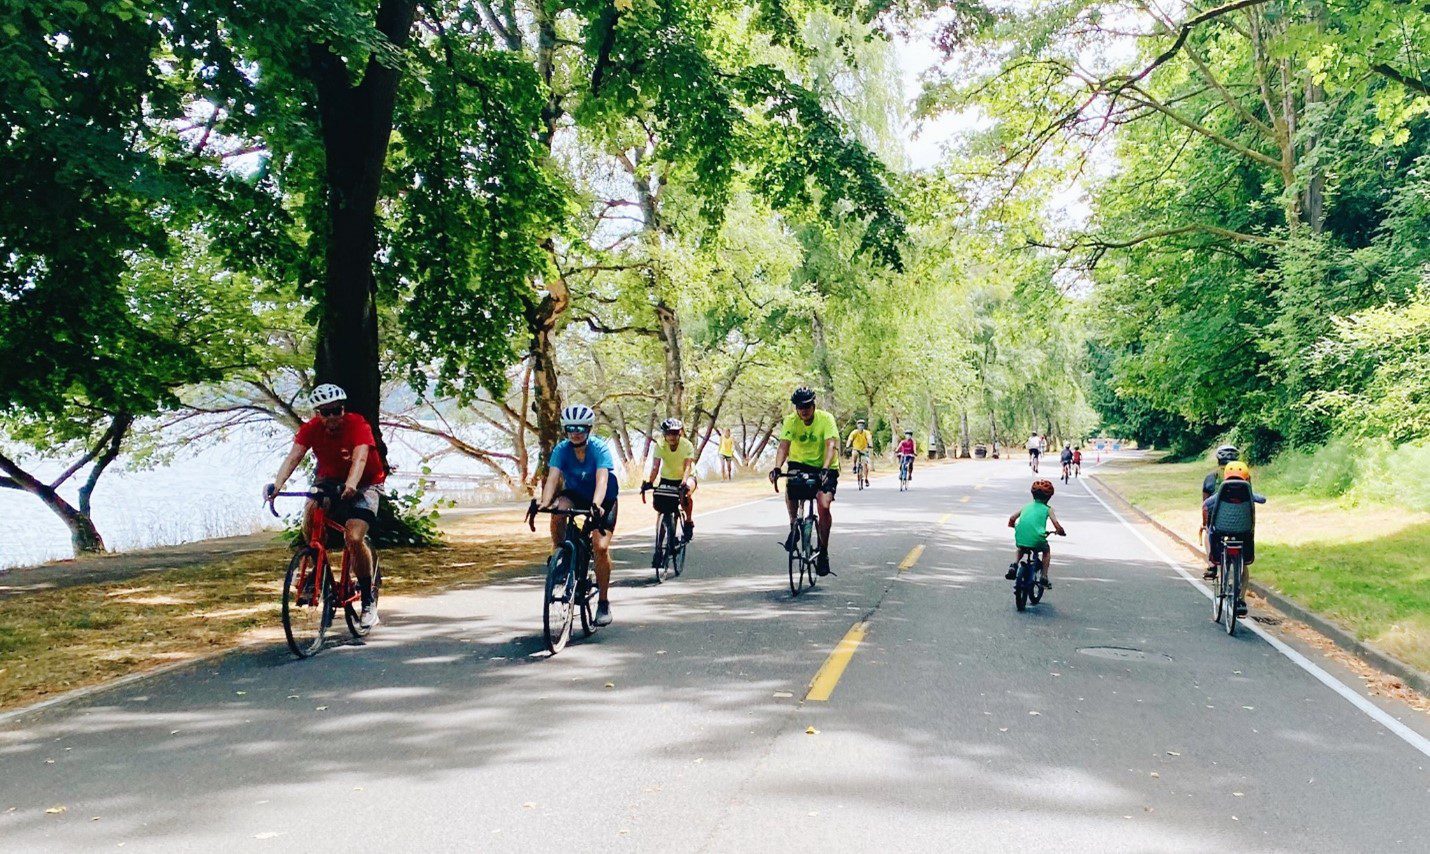 People biking along Lake Washington Boulevard on a bicycle weekend in 2020. Several people bike in both directions, with large green trees in the background.